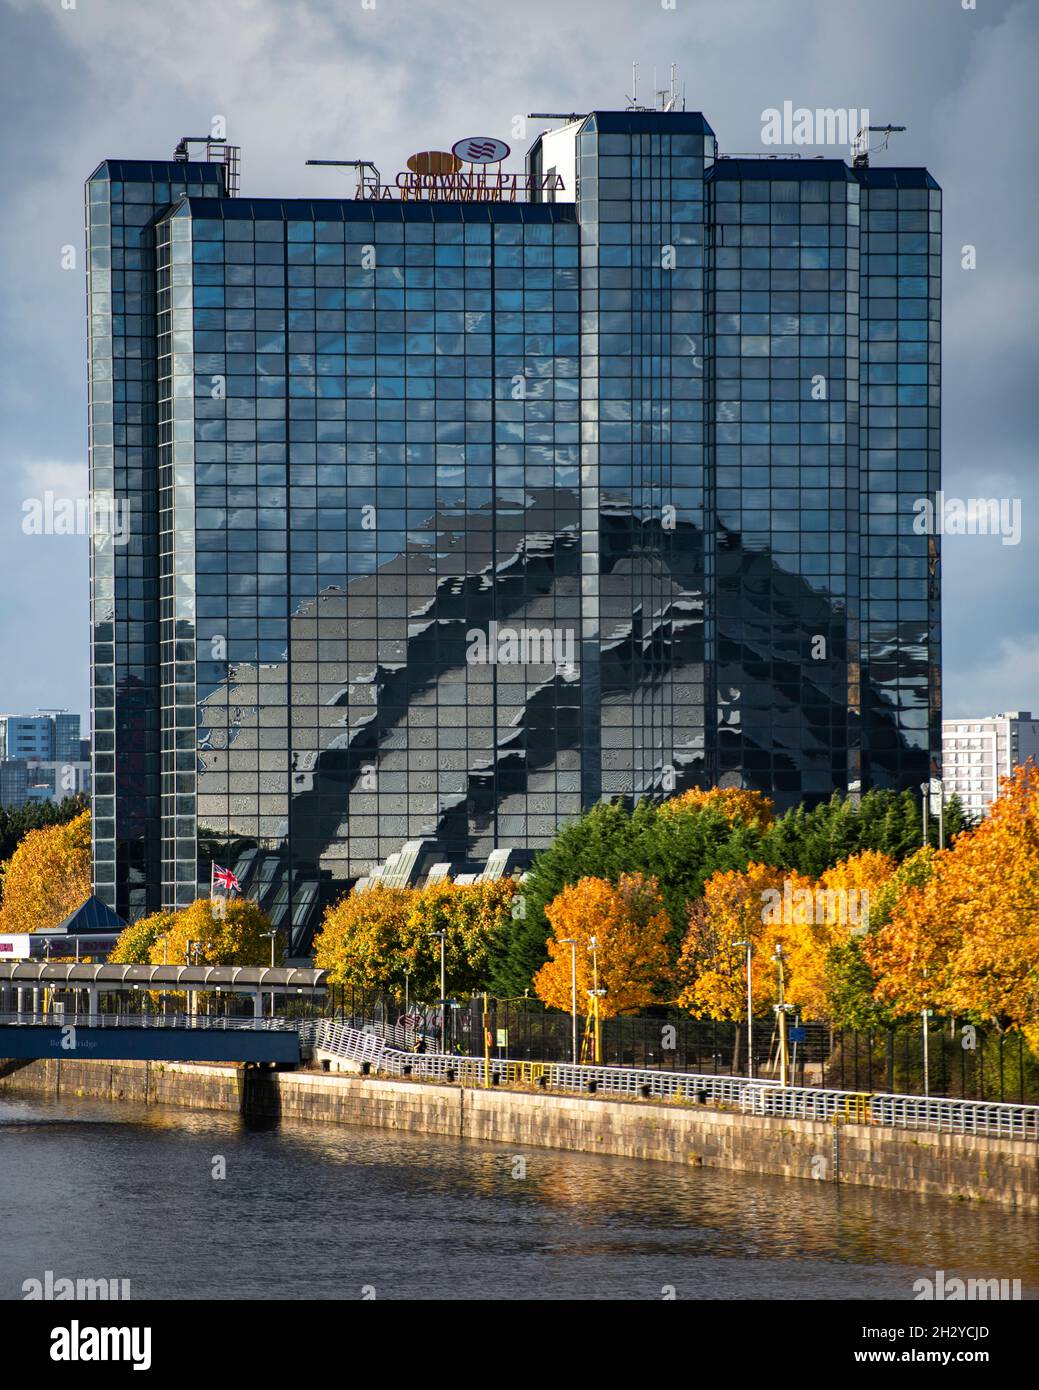 Glasgow, Scotland, UK. 24 October 2021 PICTURED: Glasgow Crown Plaza hotel reflecting the image of the SEC Armadilo building in its exterior mirrored windows. Views of the COP26 site showing the river Clyde and dockside, with the Scottish Event Campus buildings (OVO Hydro Arena, SEC Armadillo and SECC buildings) along with the Crown Plaza Hotel and the ring of steel security fence surrounding the area. Days until Heads of State, along with thousands of delegates and media and protestors are expected to land in Glasgow very shortly for the beginning of the Climate Change Summit starting on 31 O Stock Photo